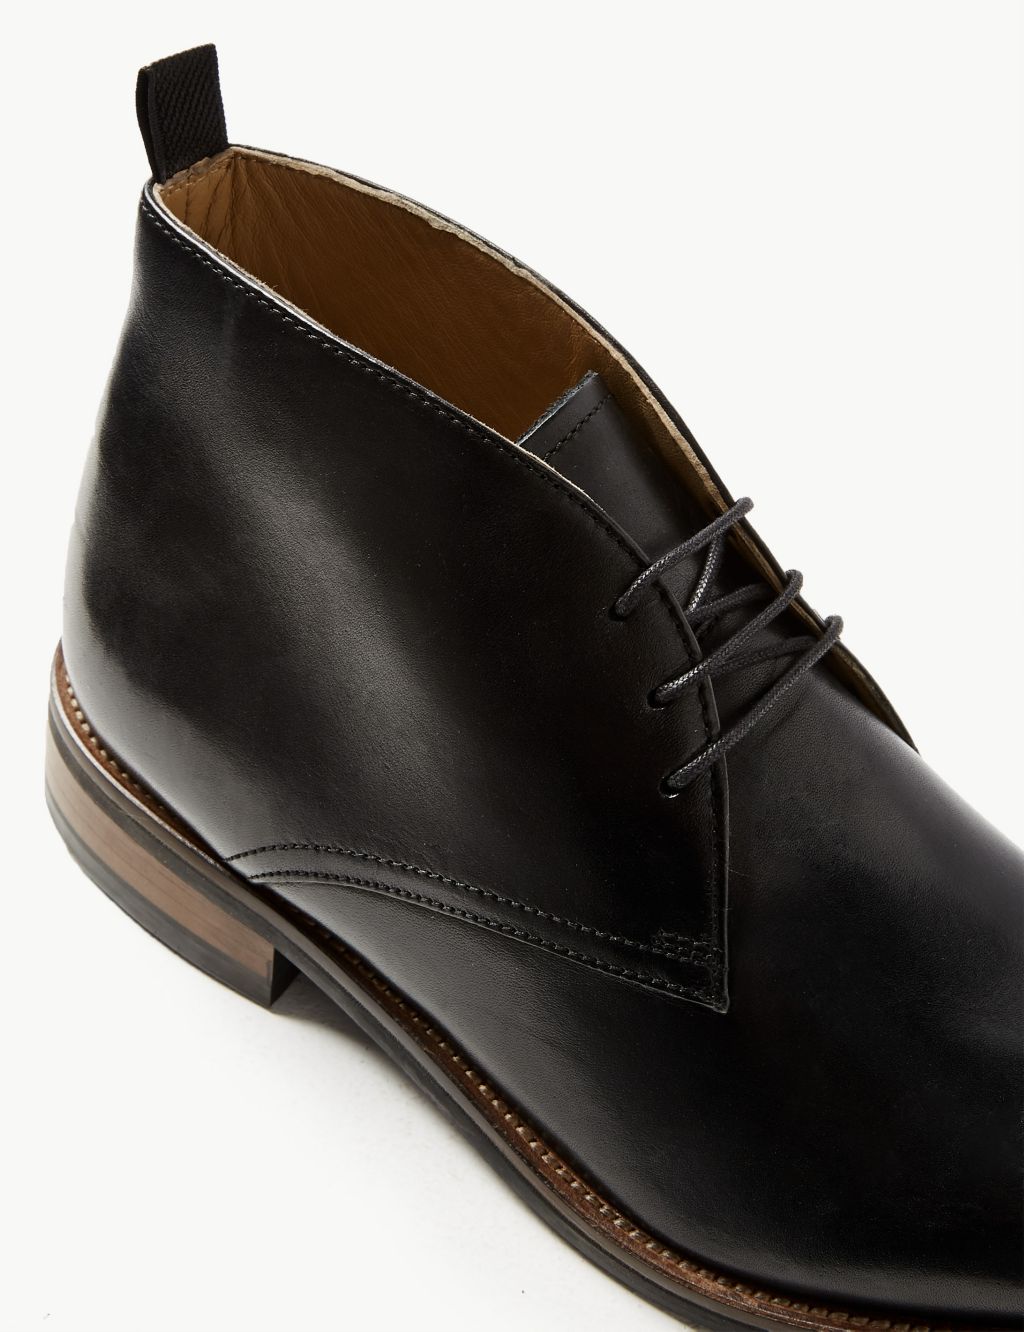 Leather Chukka Boots | M&S Collection | M&S